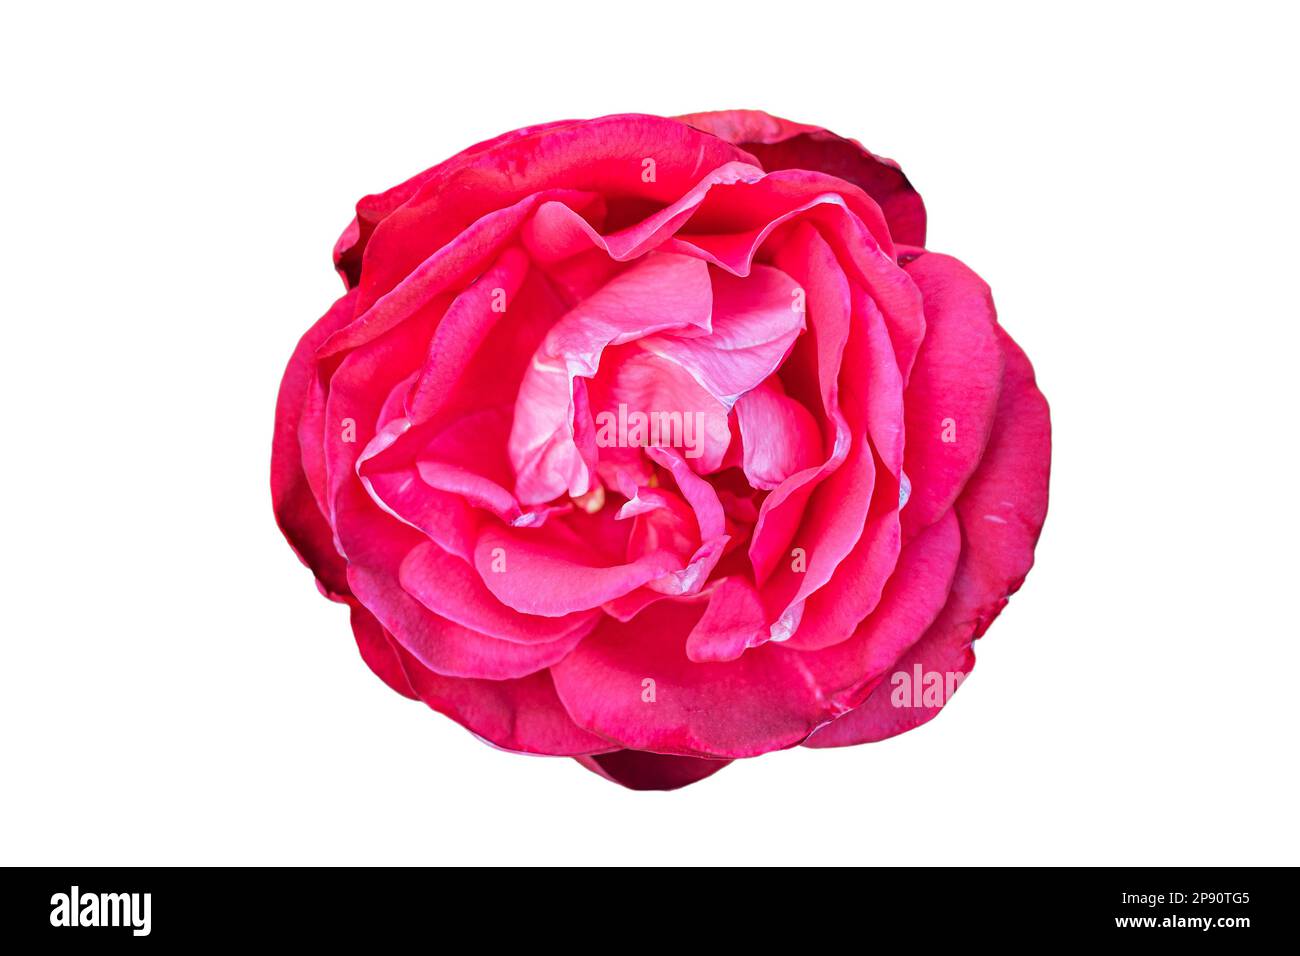 beautiful open pink rose blossom isolated on white background Stock Photo